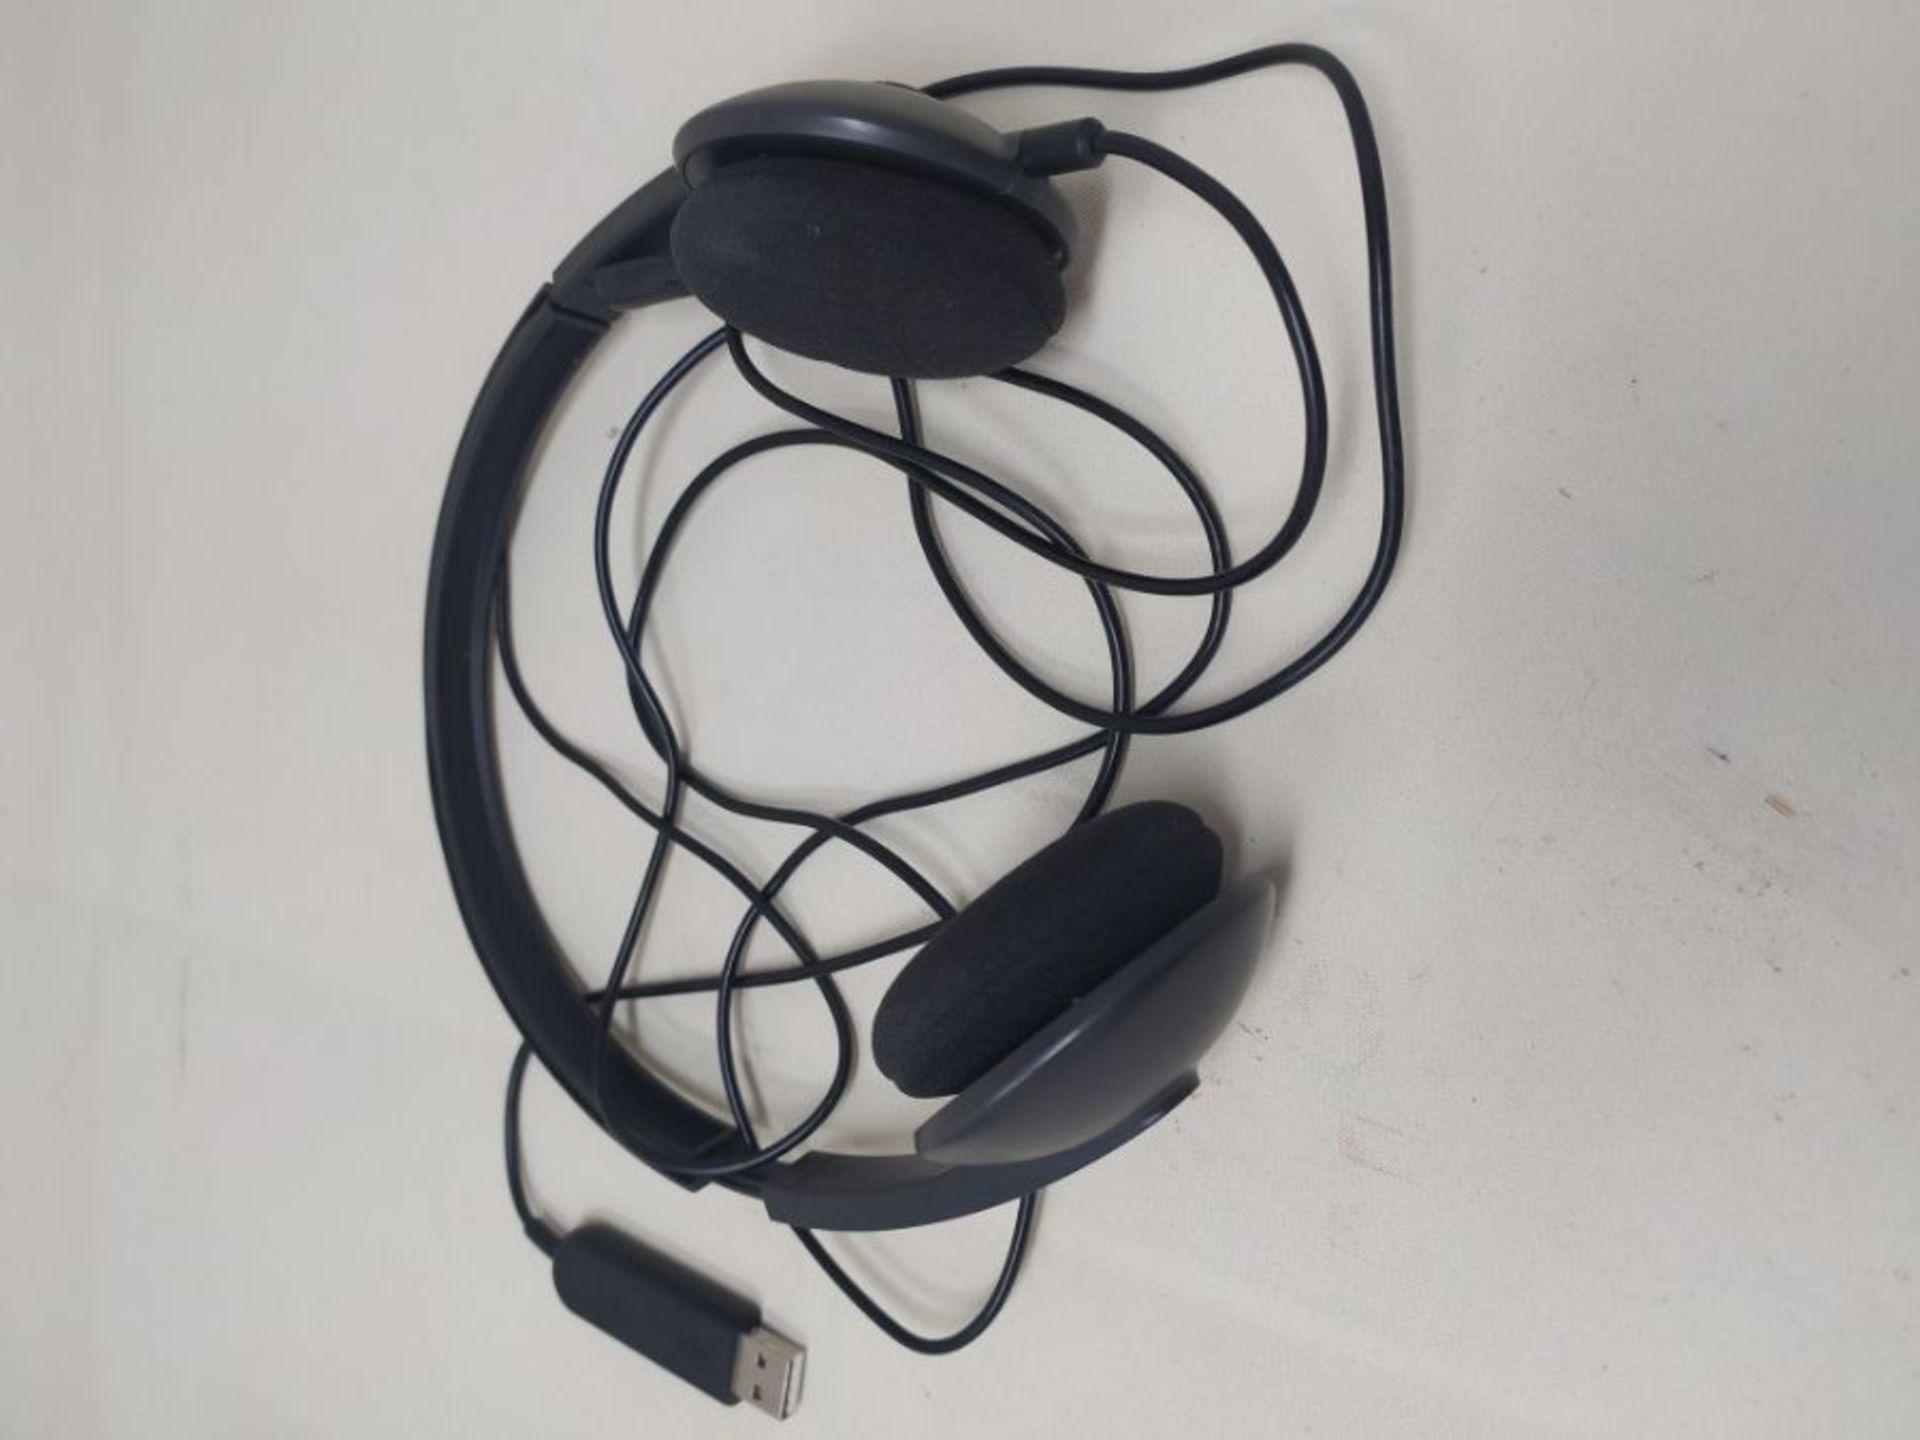 Logitech H340 Wired Headset, Stereo Headphones with Noise-Cancelling Microphone, USB, - Image 2 of 2